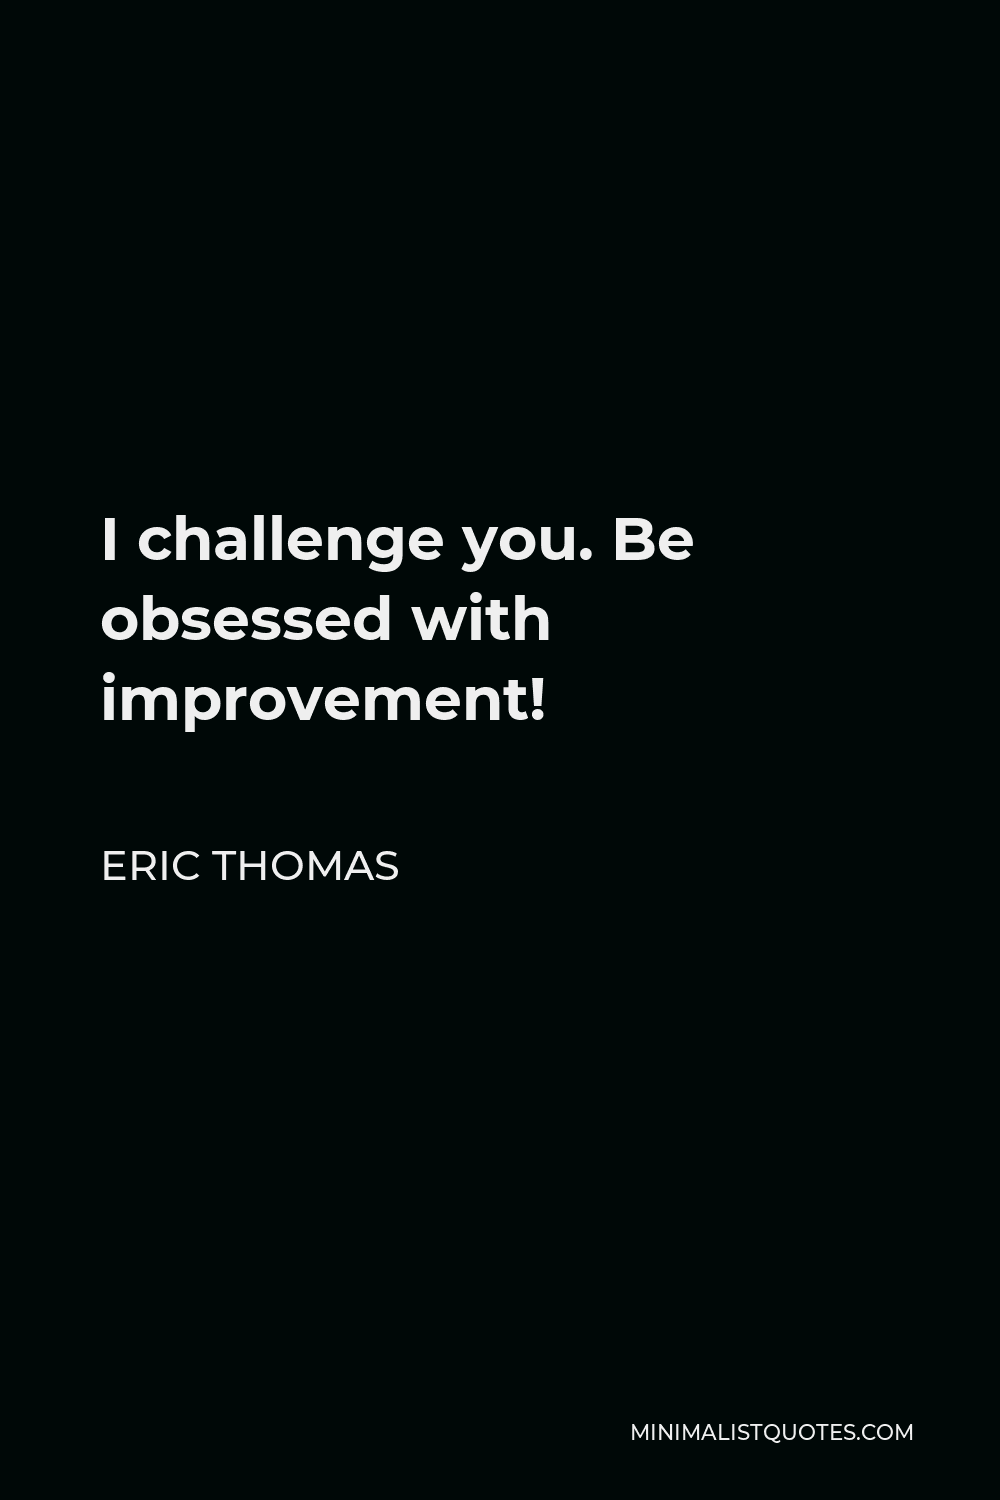 Eric Thomas Quote - I challenge you. Be obsessed with improvement!